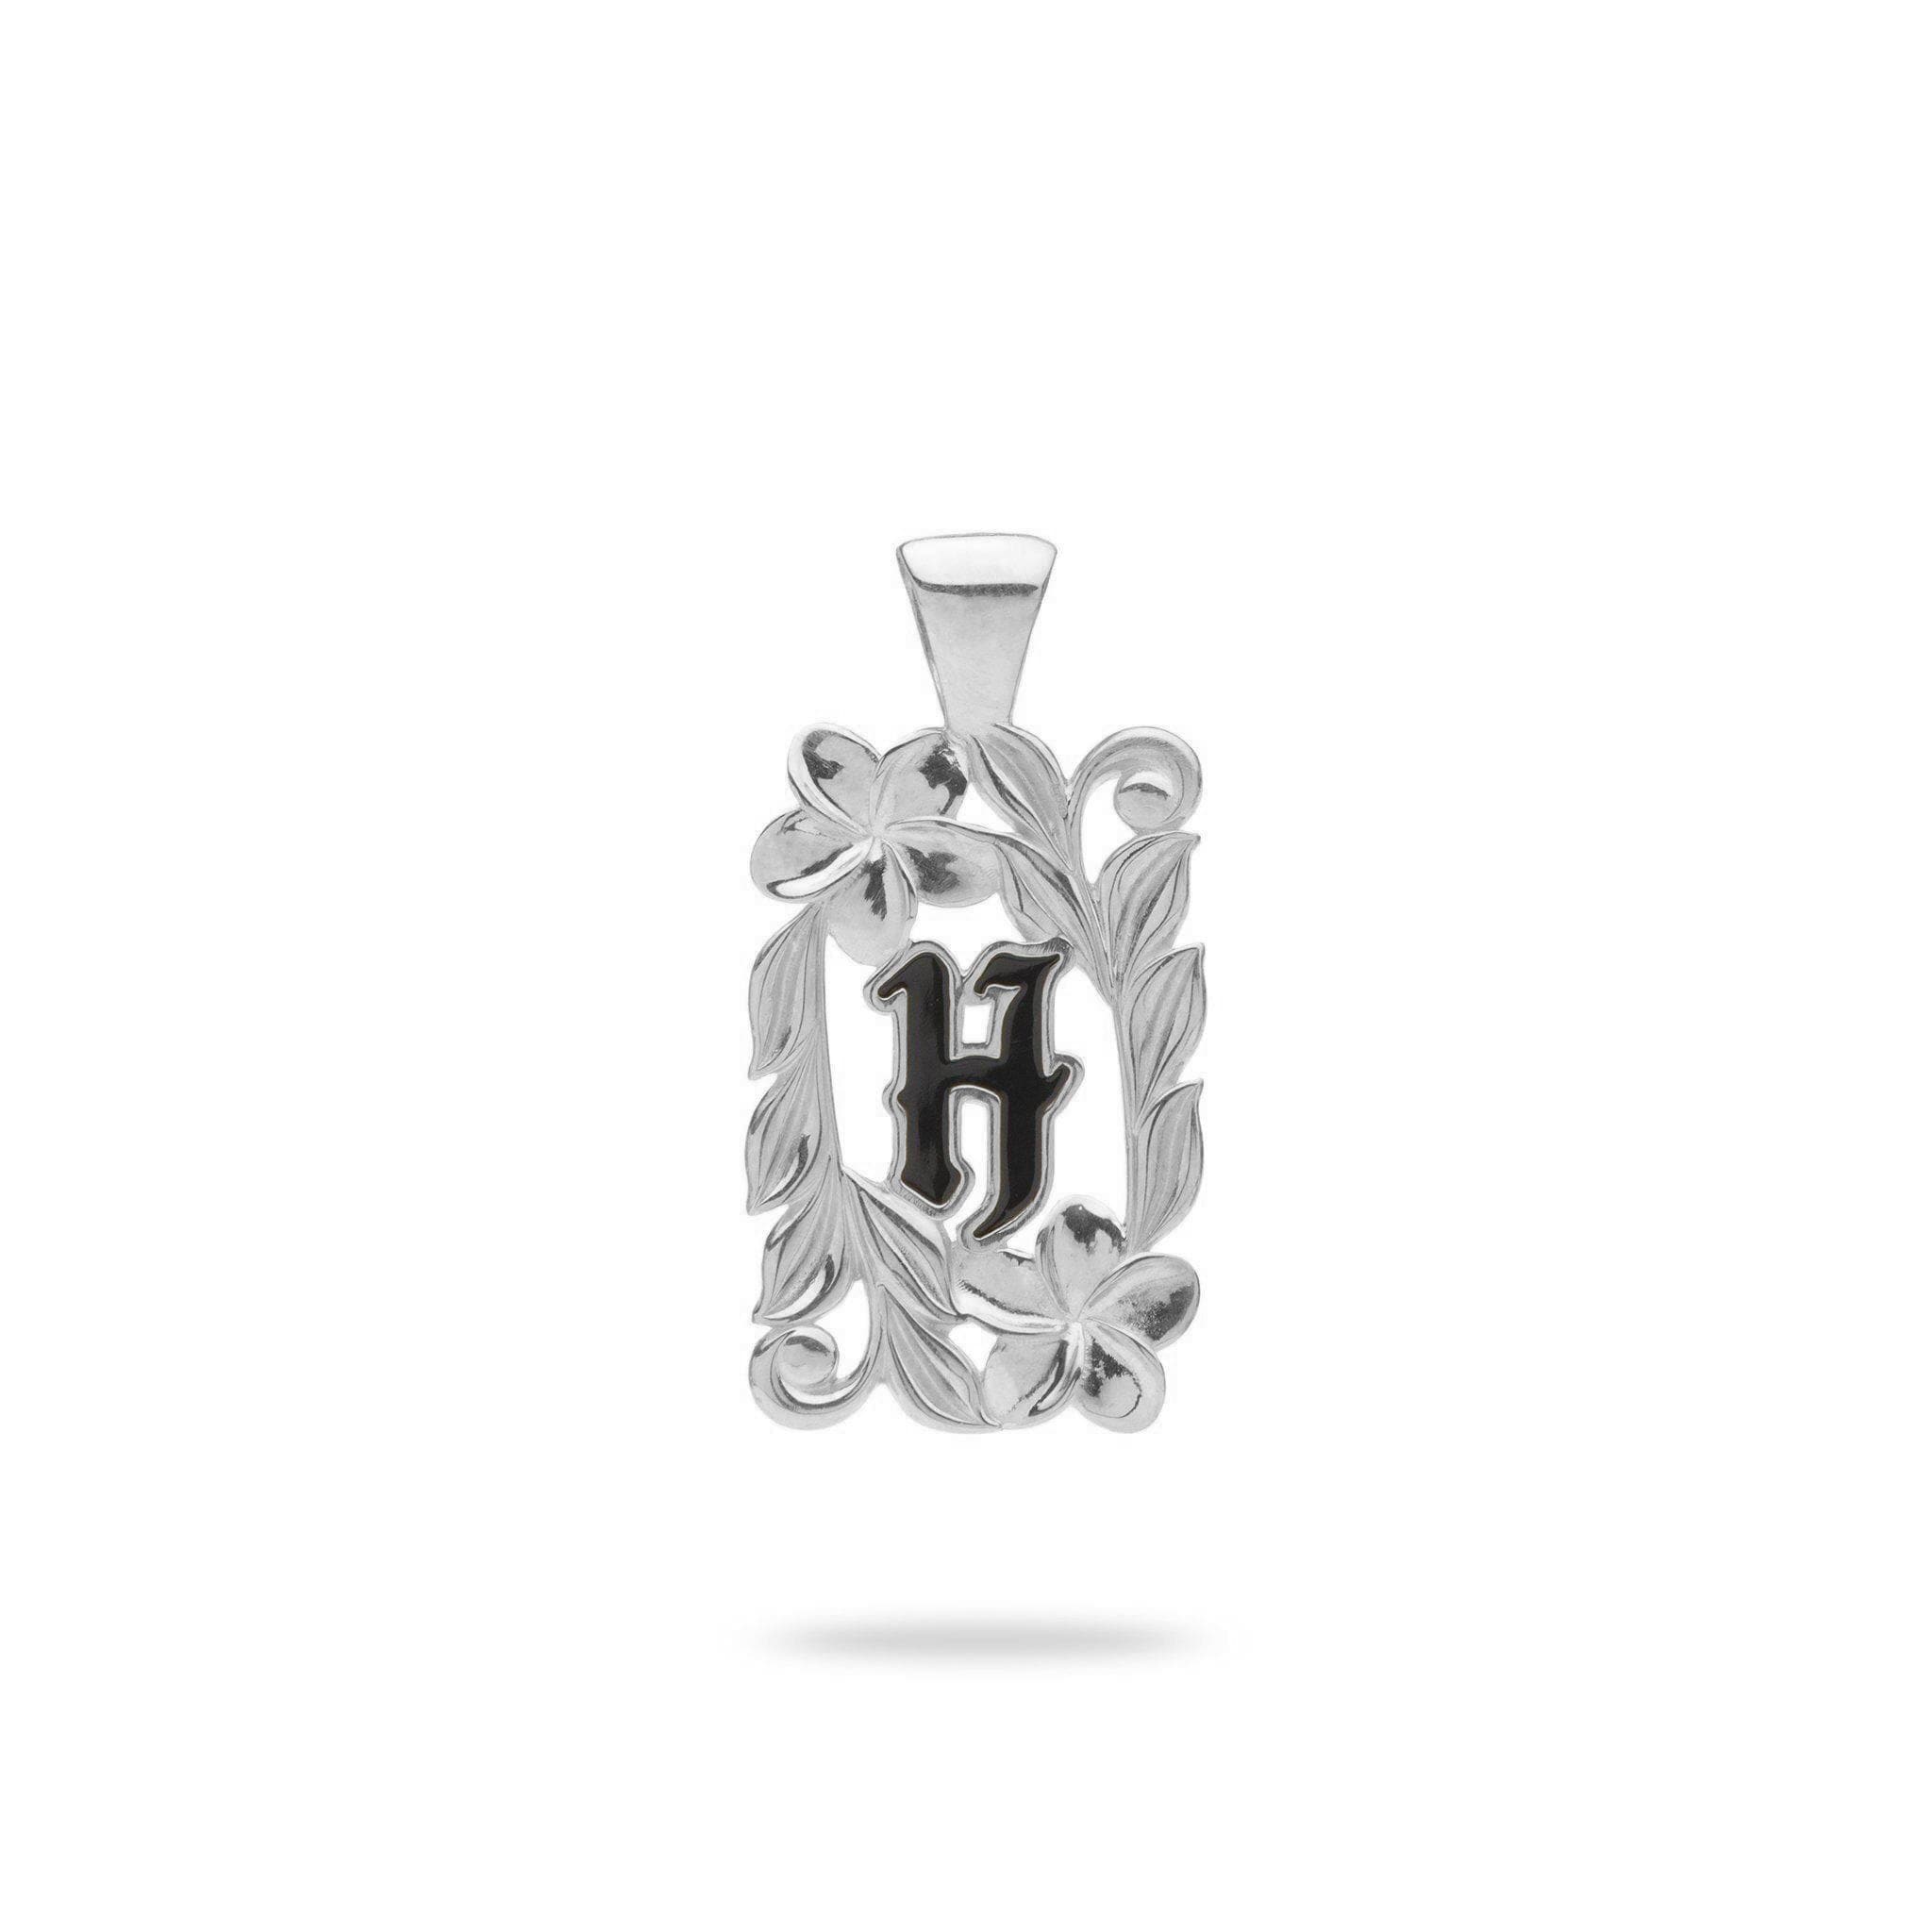 Special Order Hawaiian Heirloom Initial Pendant in White Gold - 014-03615-H-14W